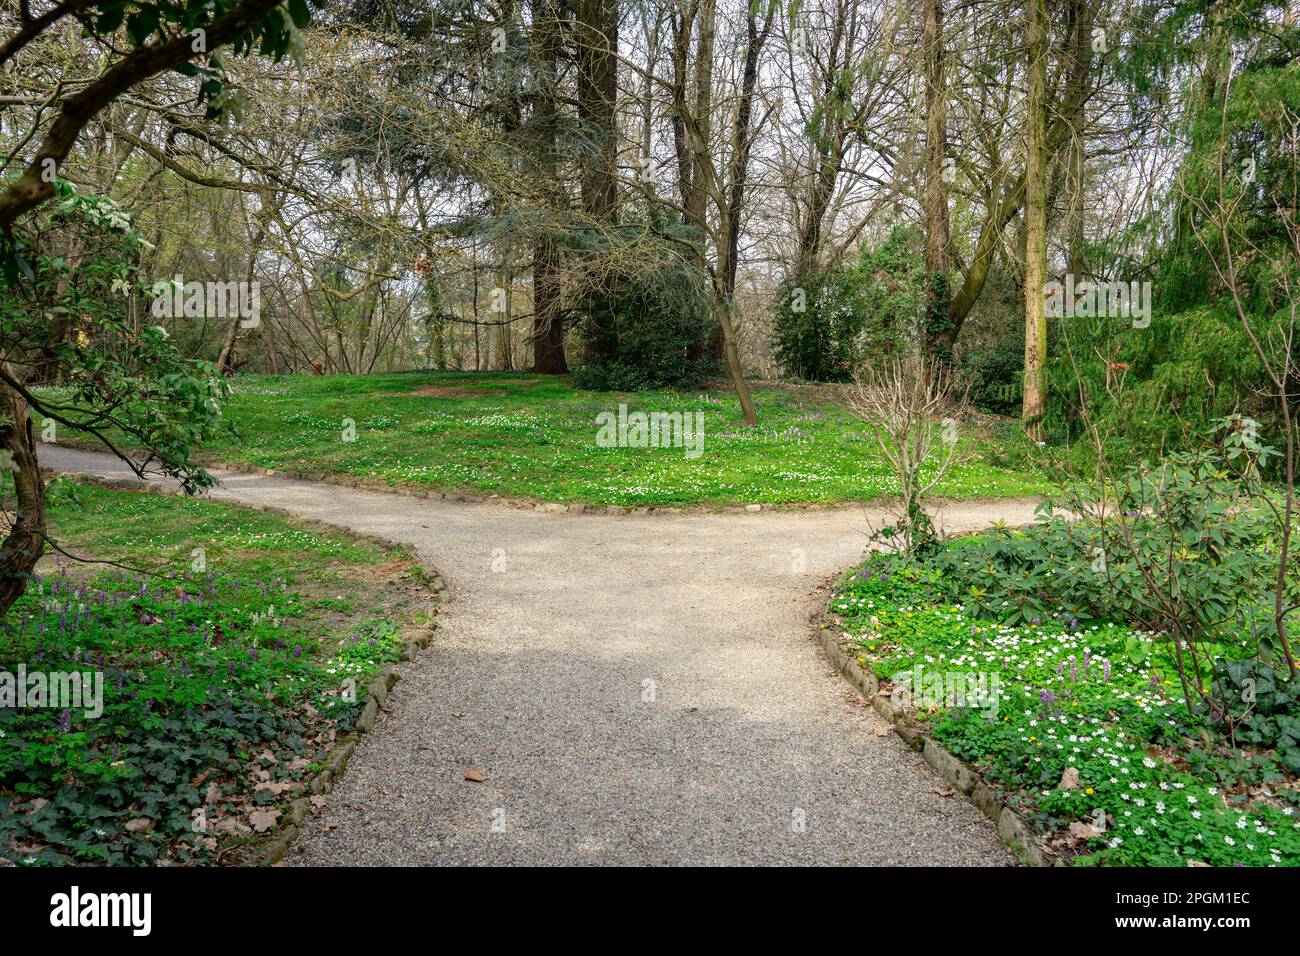 two paths in the nature decision concept in Sarvar arboretum early spring time with wild flowers . Stock Photo